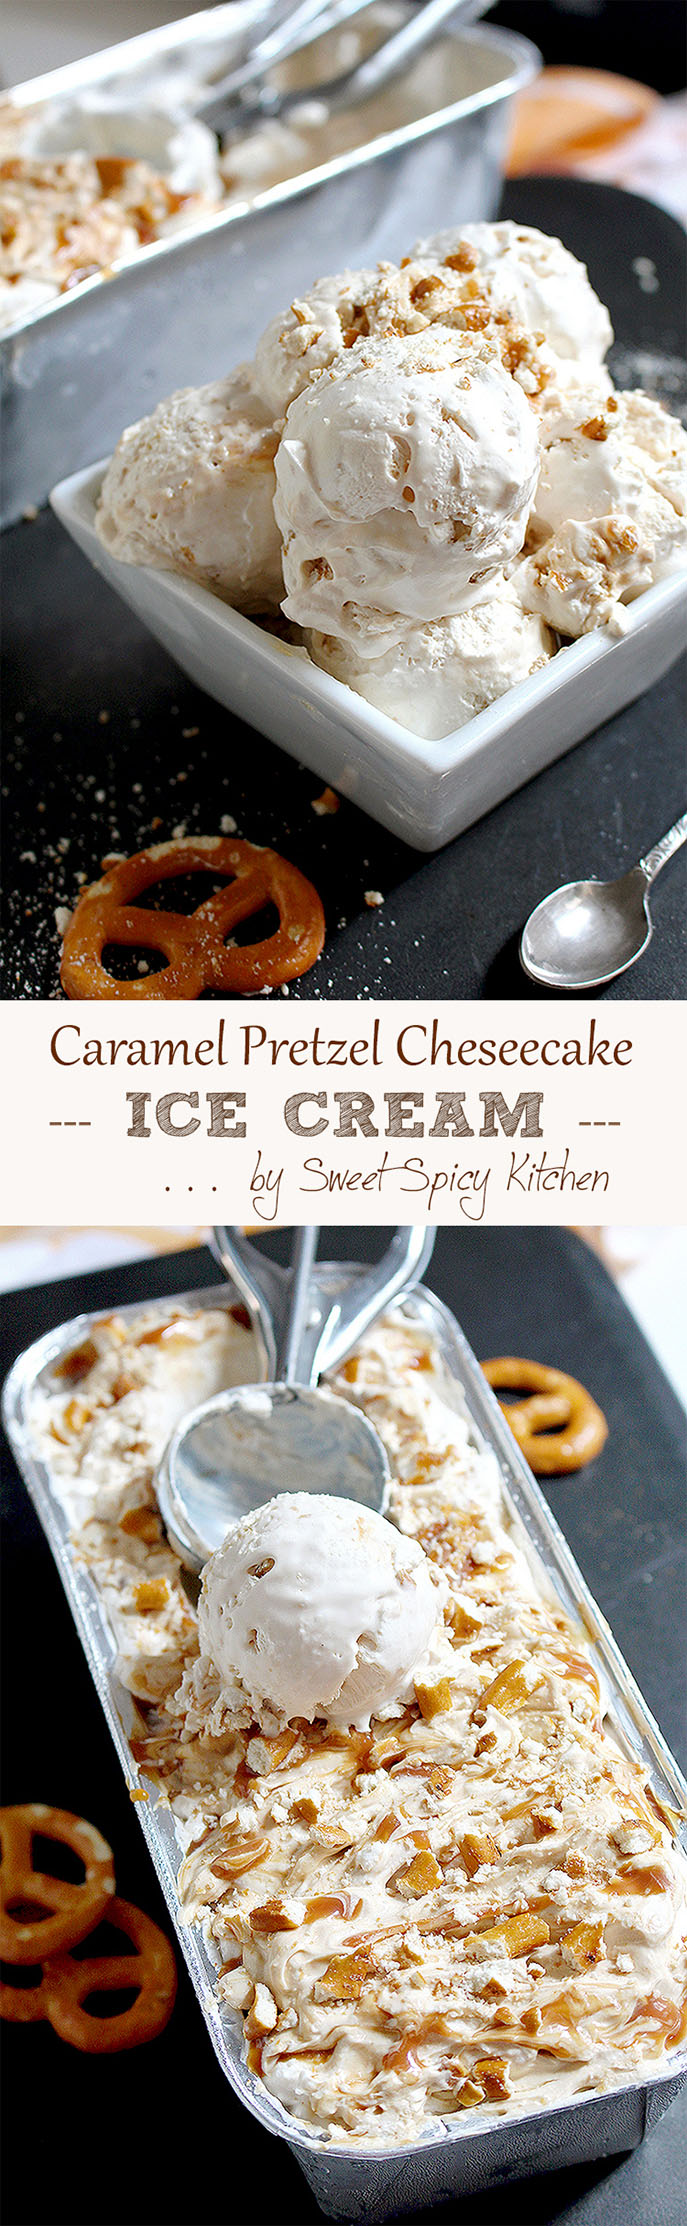 Great combo of pretzel and caramel cheesecake in form of ice cream. Absolutely delicious and tasty Caramel Pretzel Cheesecake Ice Cream.